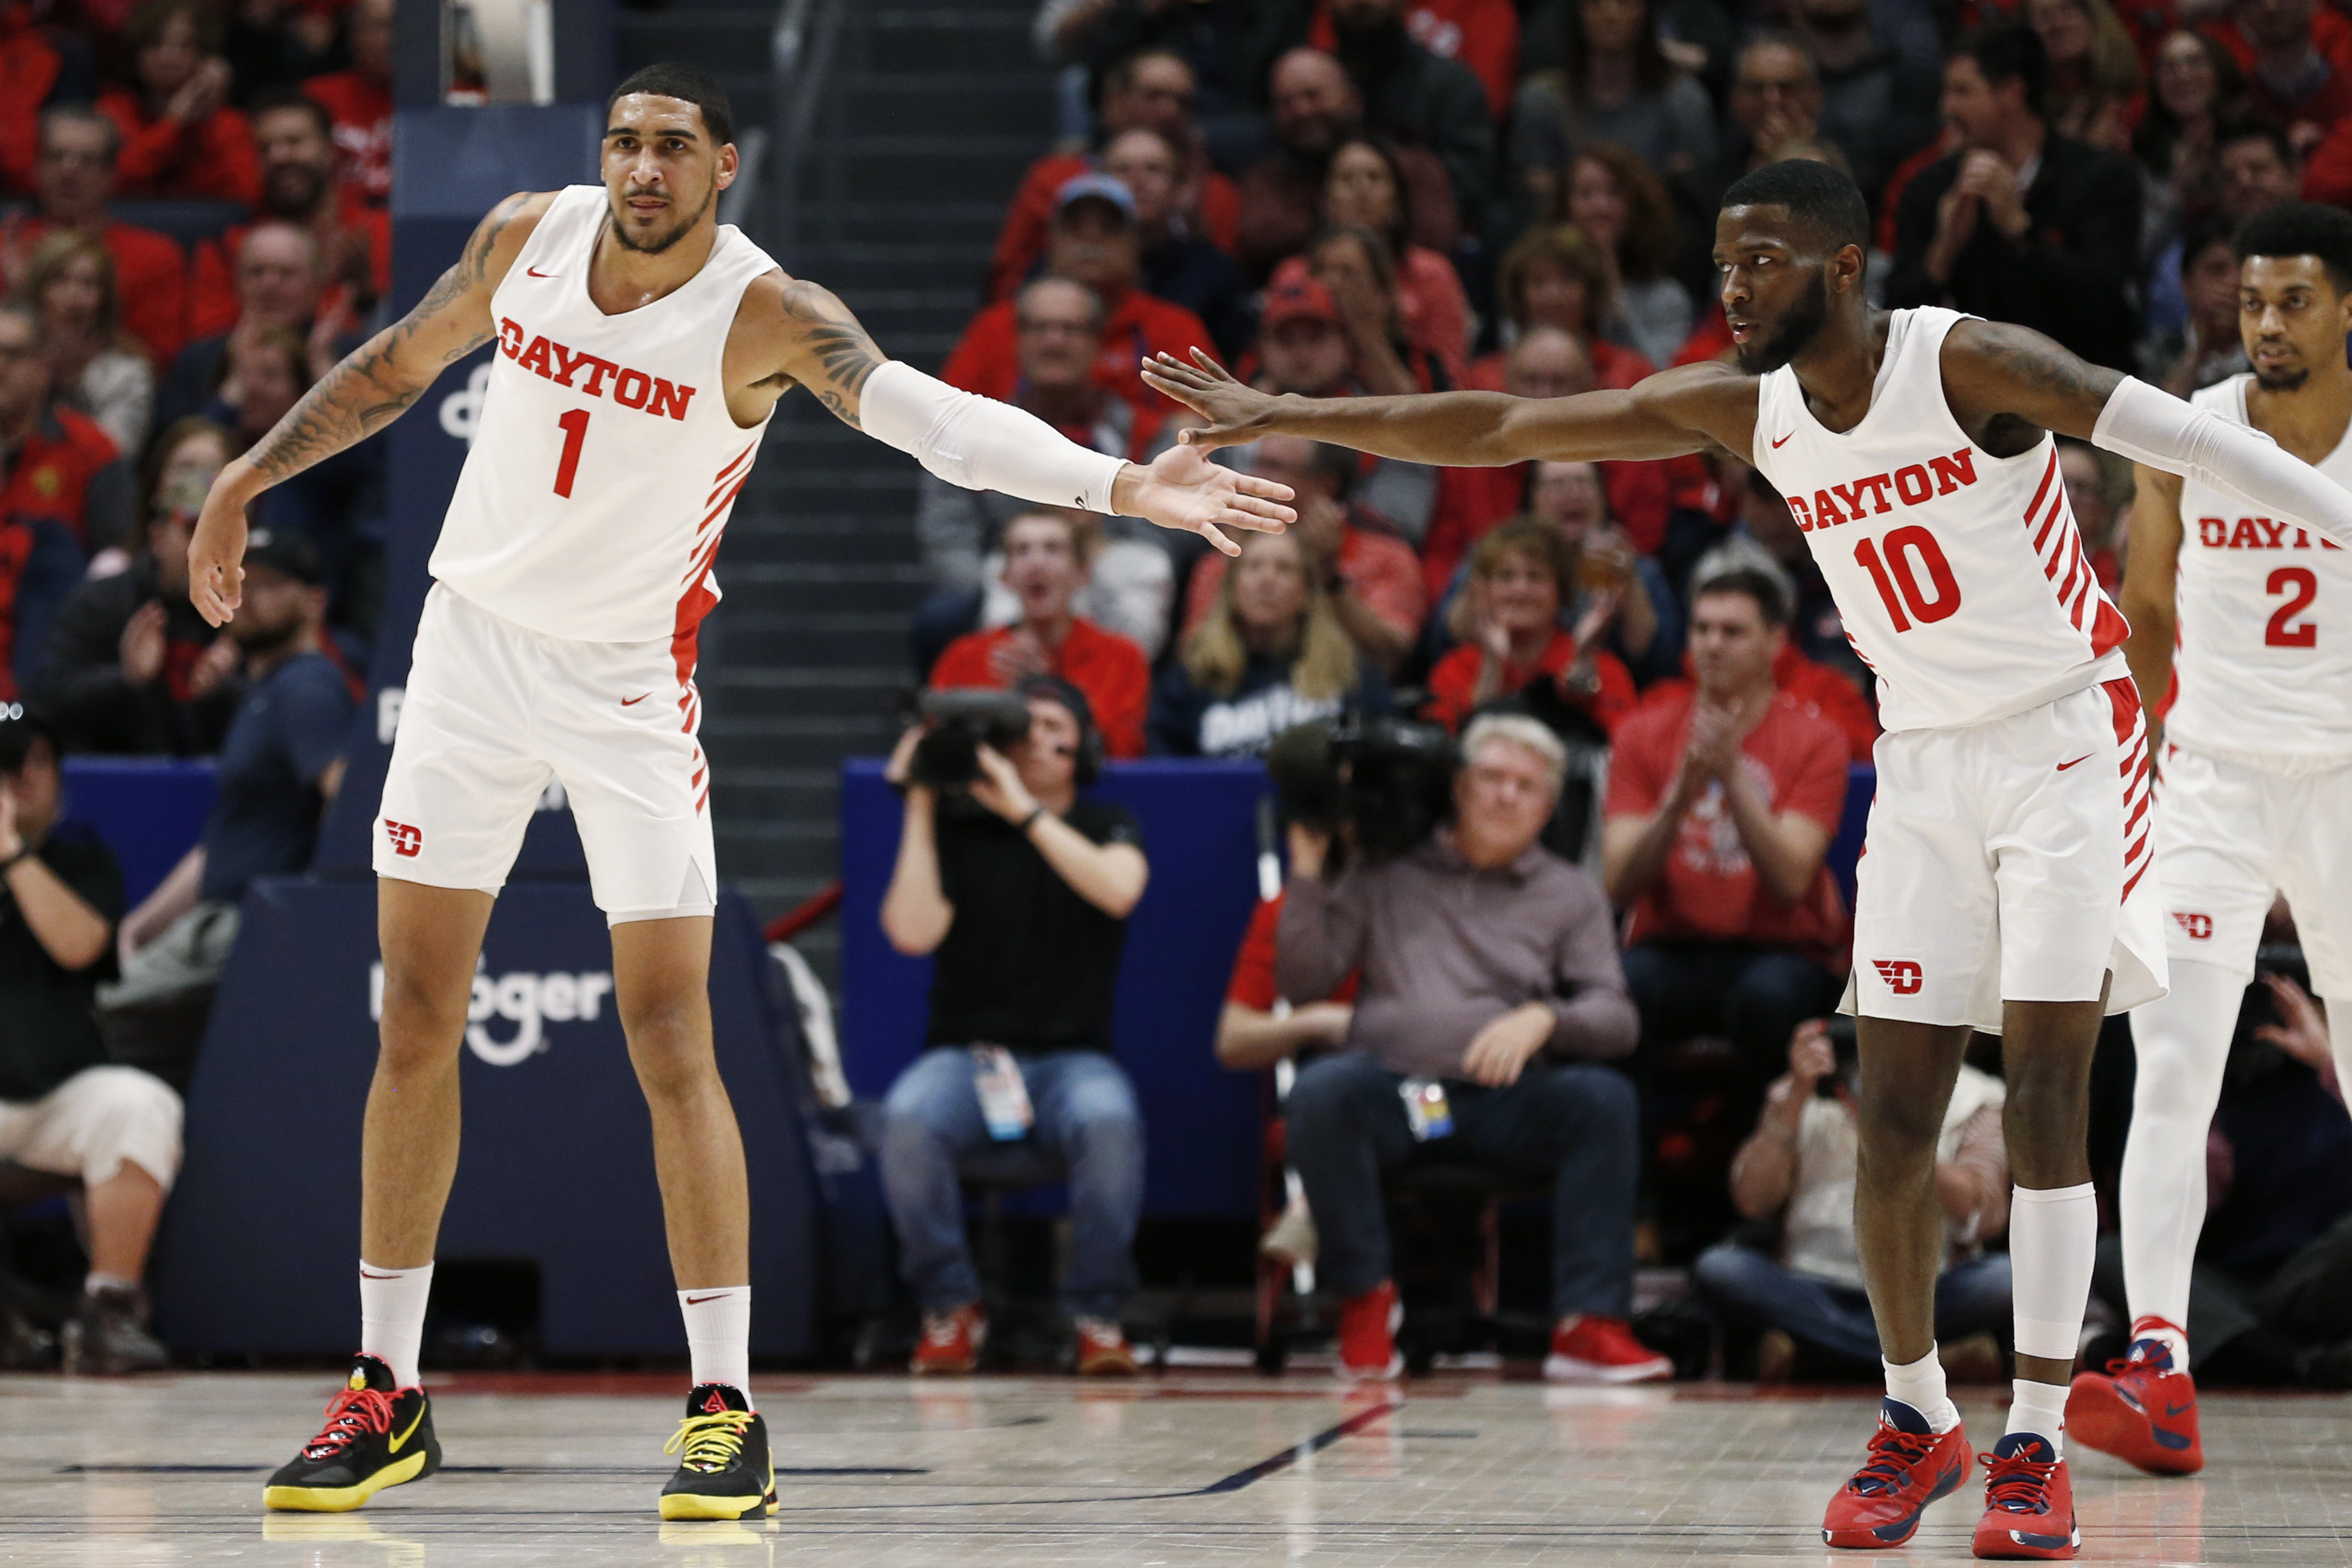 No. 4 Dayton gets A-10 title with 82-67 win over Davidson